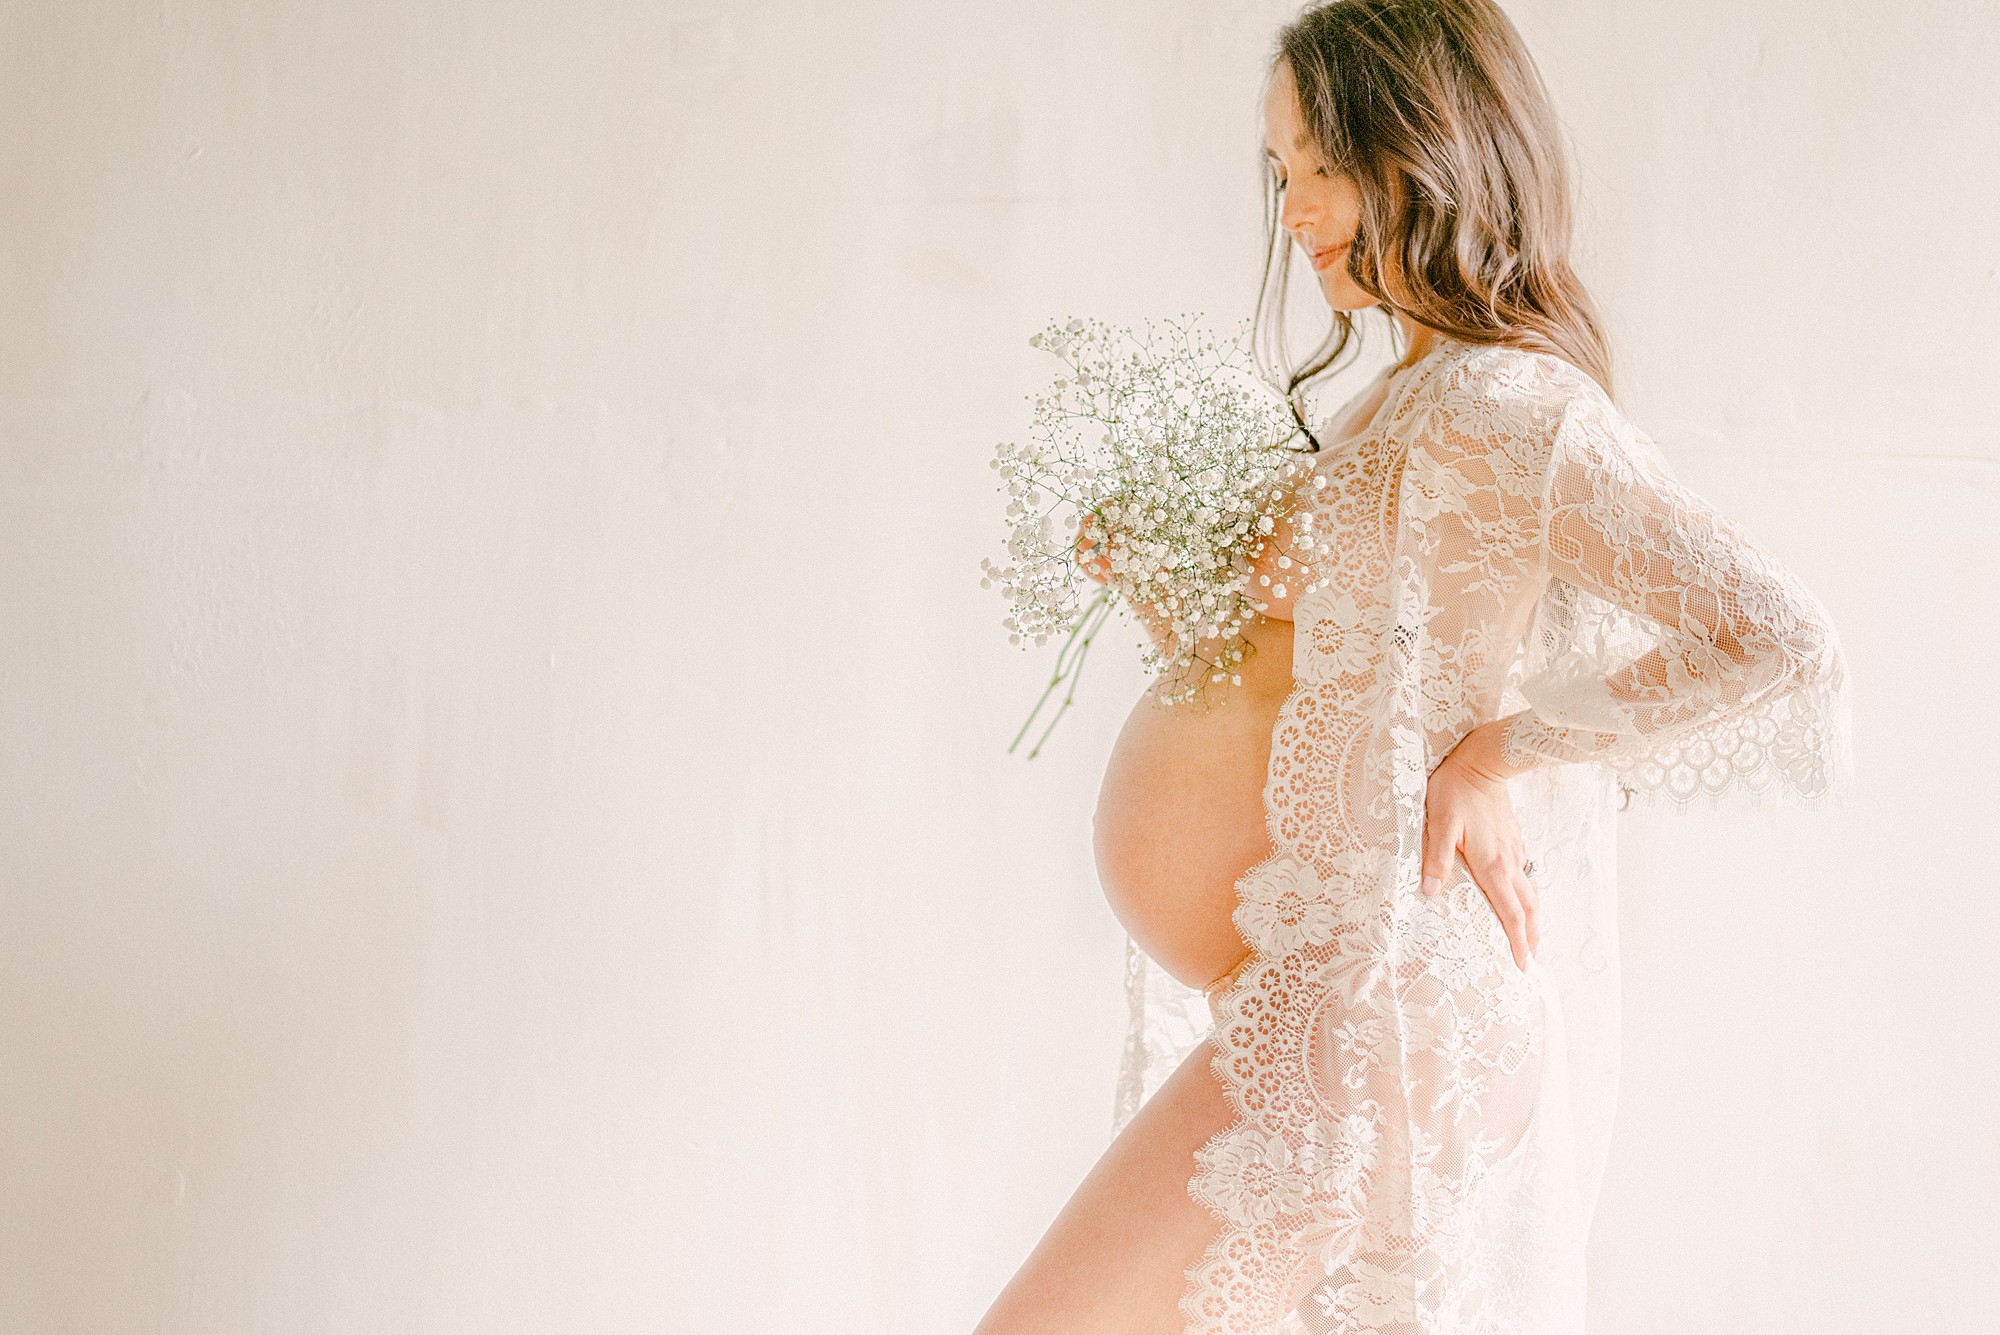 Expecting mother in lace robe and holding baby's breath. She's standing in a natural lit studio with mineral wall backdrop